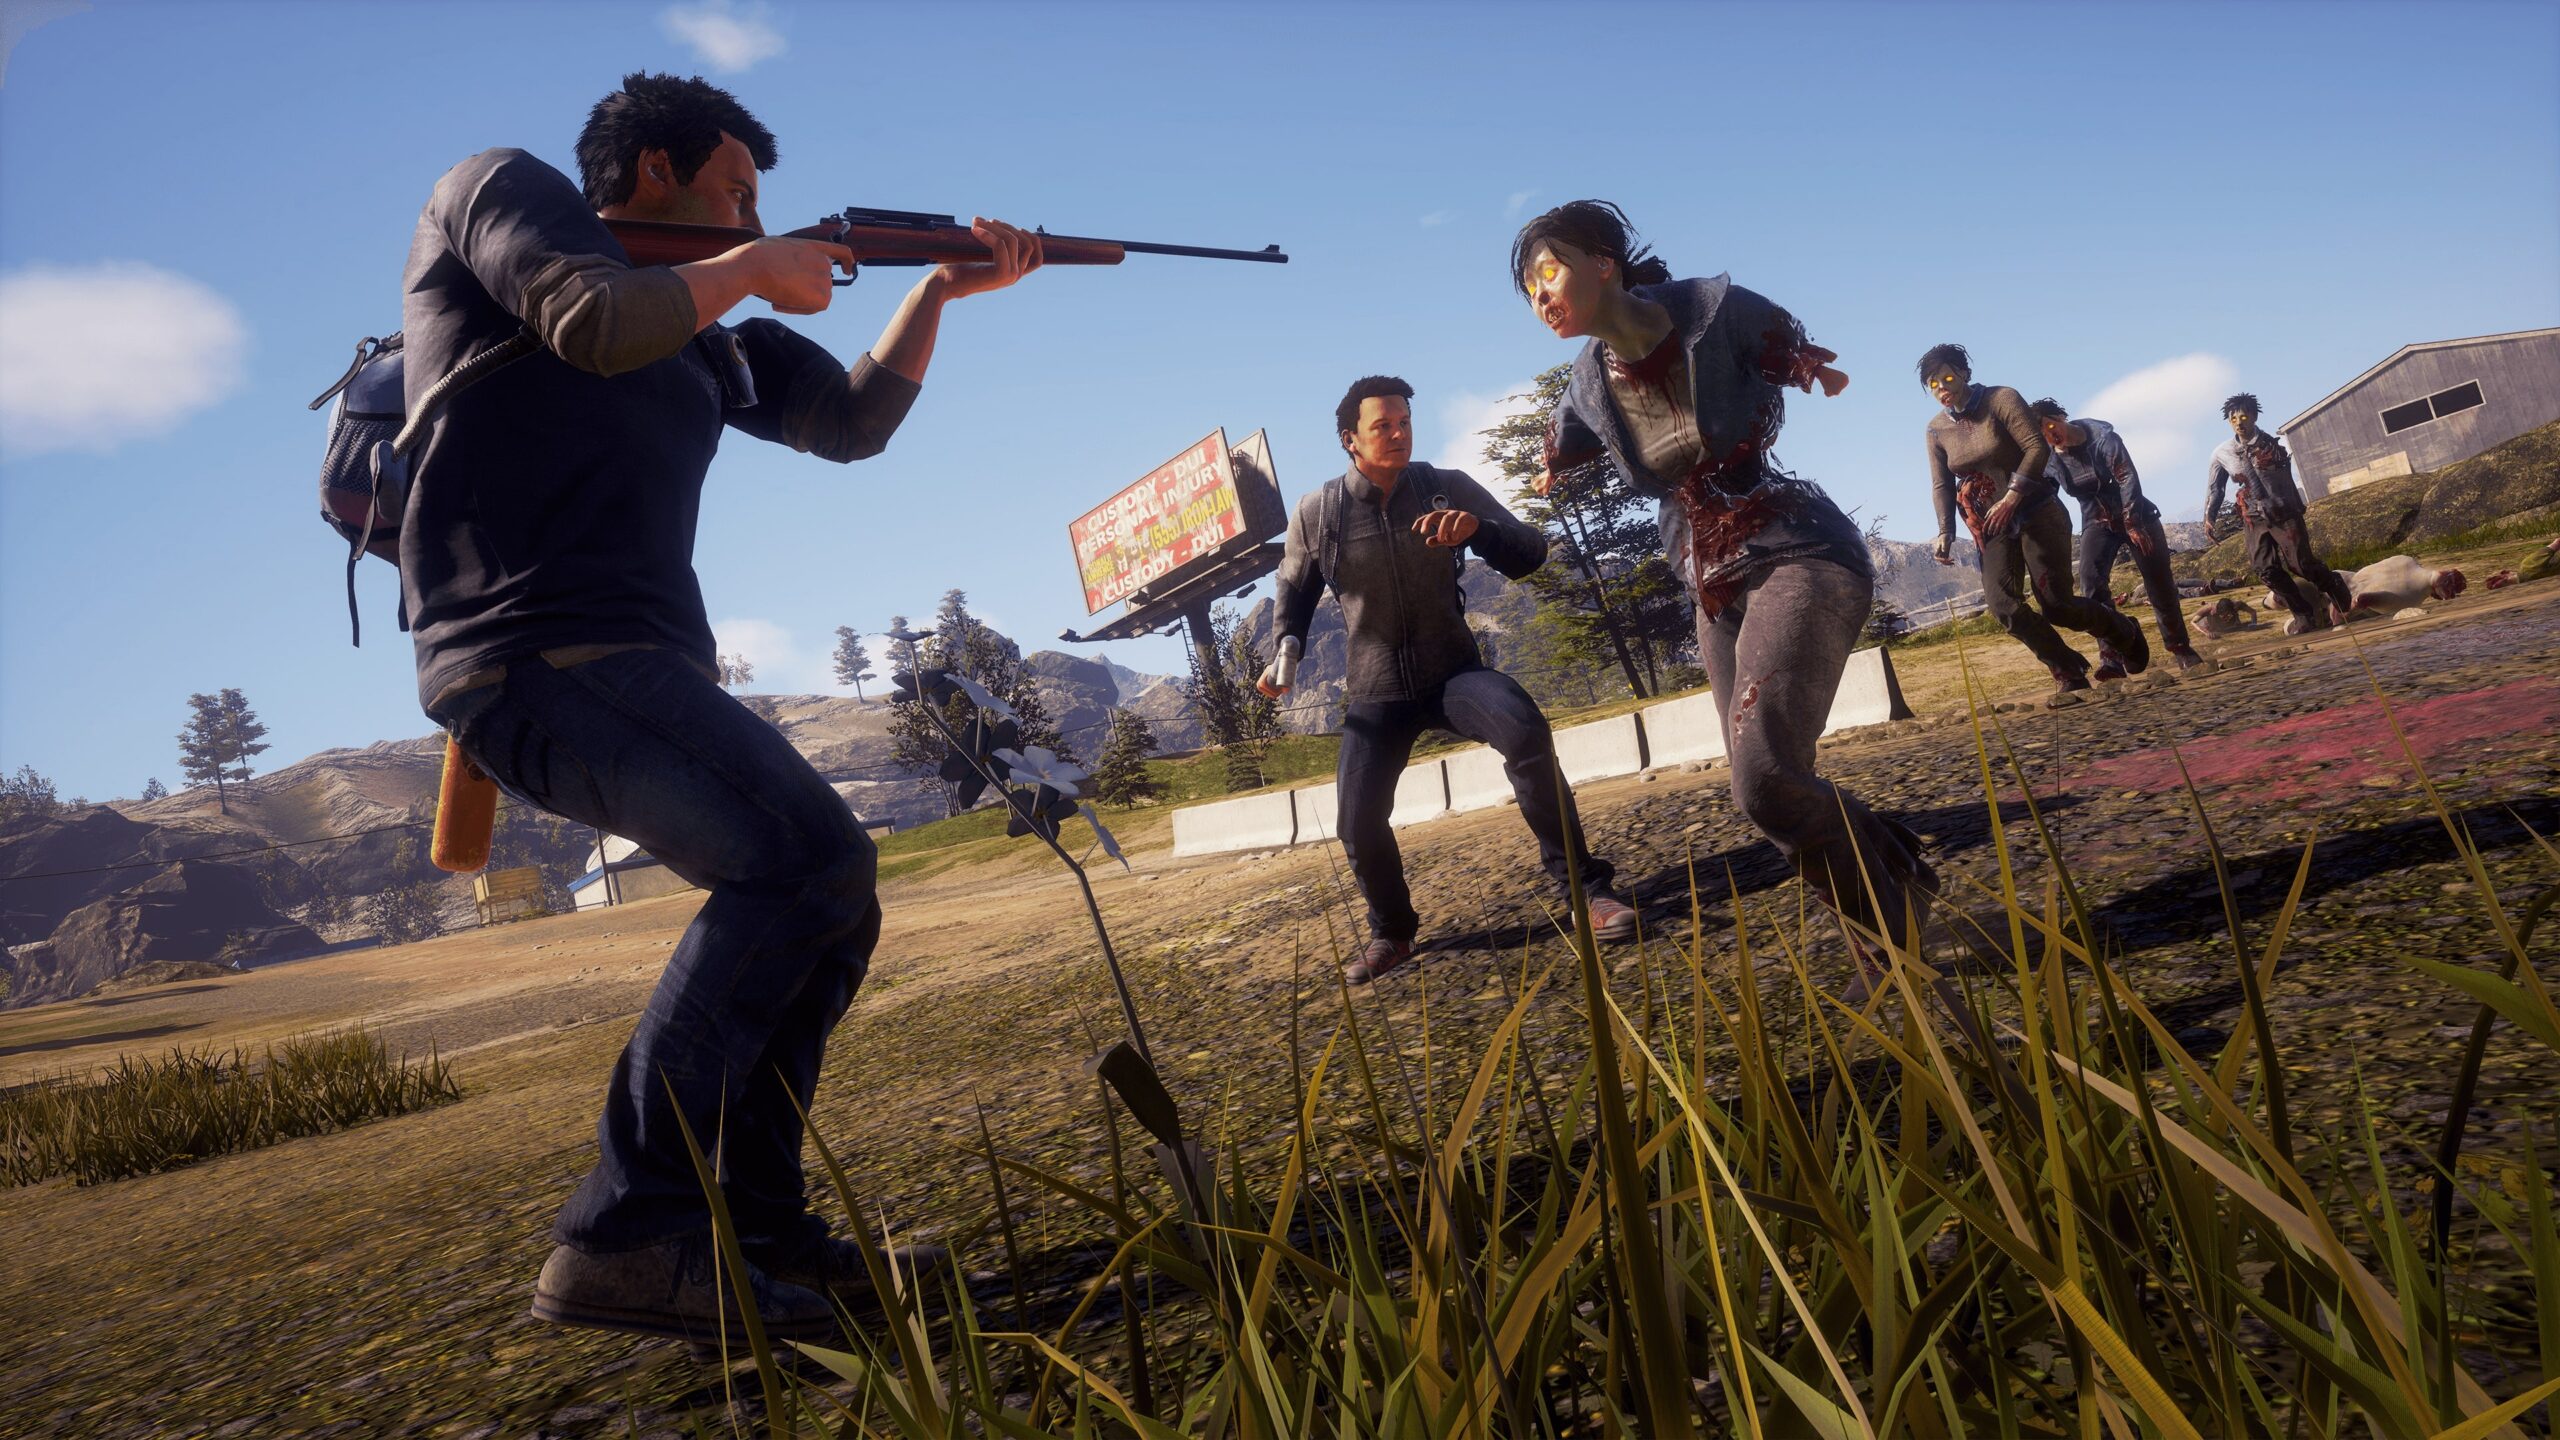 State of Decay 3 Announced, Trailer, Release Date, Supporting Platforms,  and much more – GamePlayerr